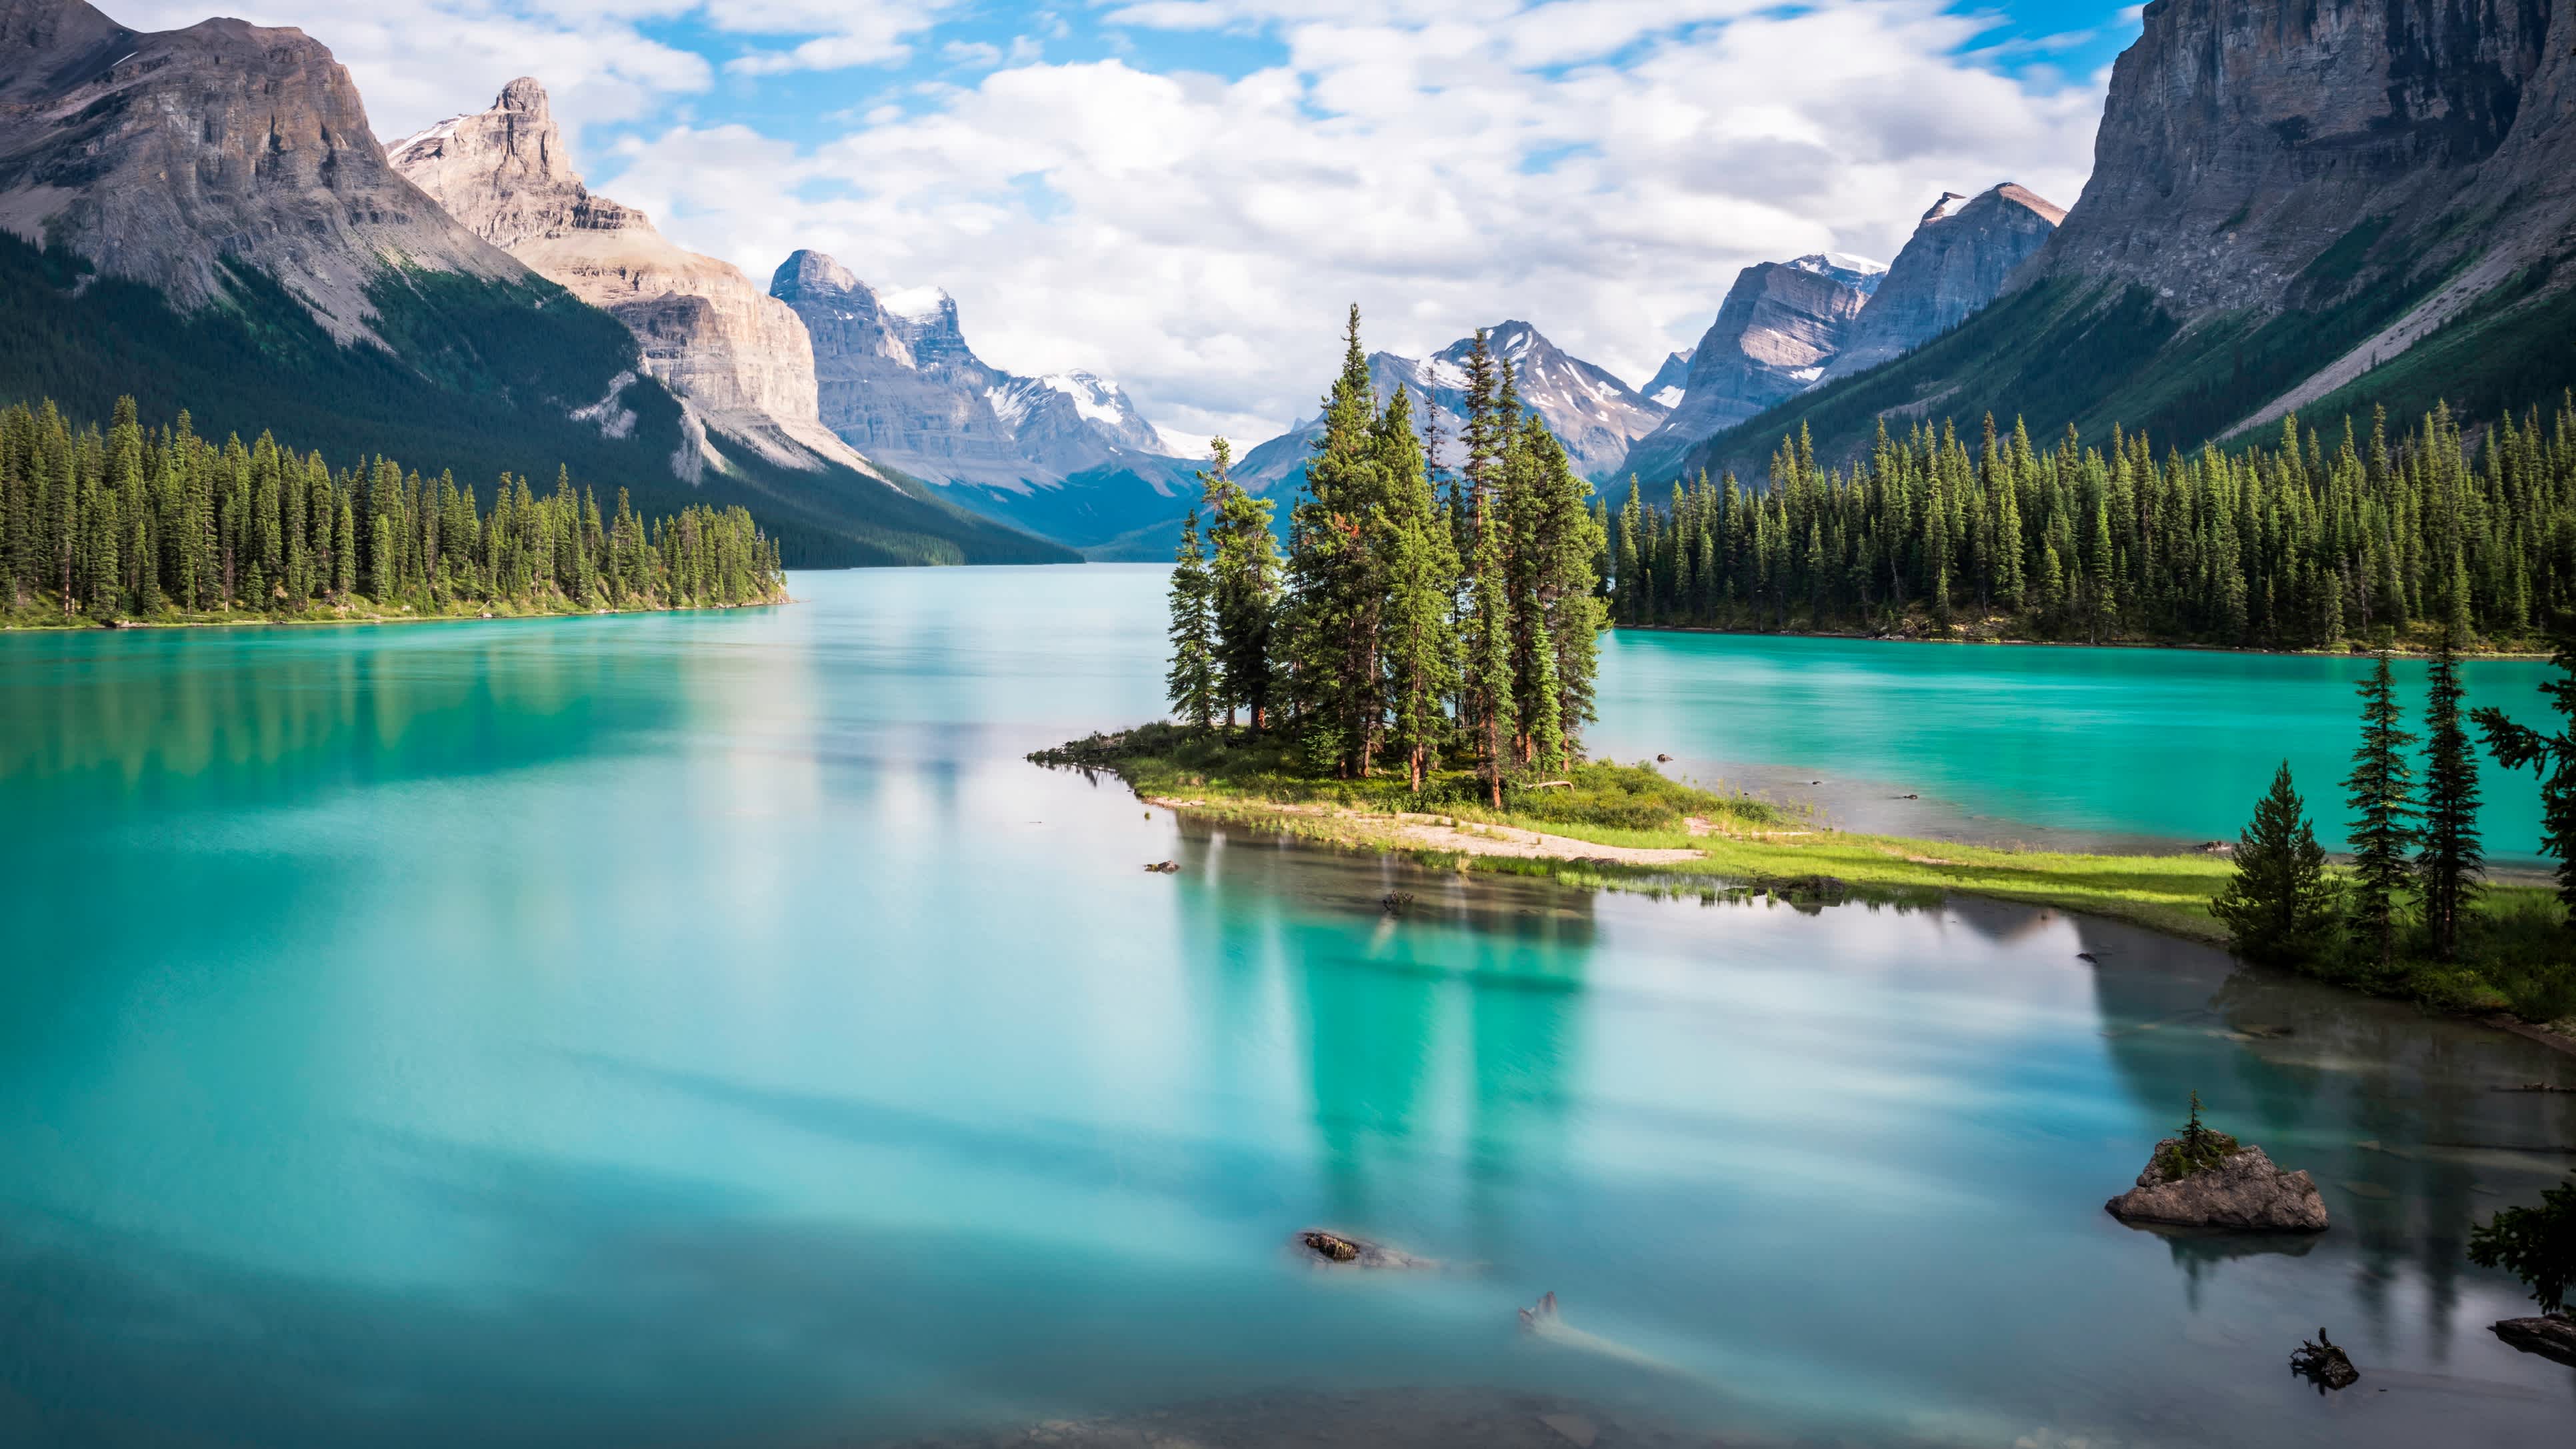 Discover Jasper National Park during your Alberta Vacation.